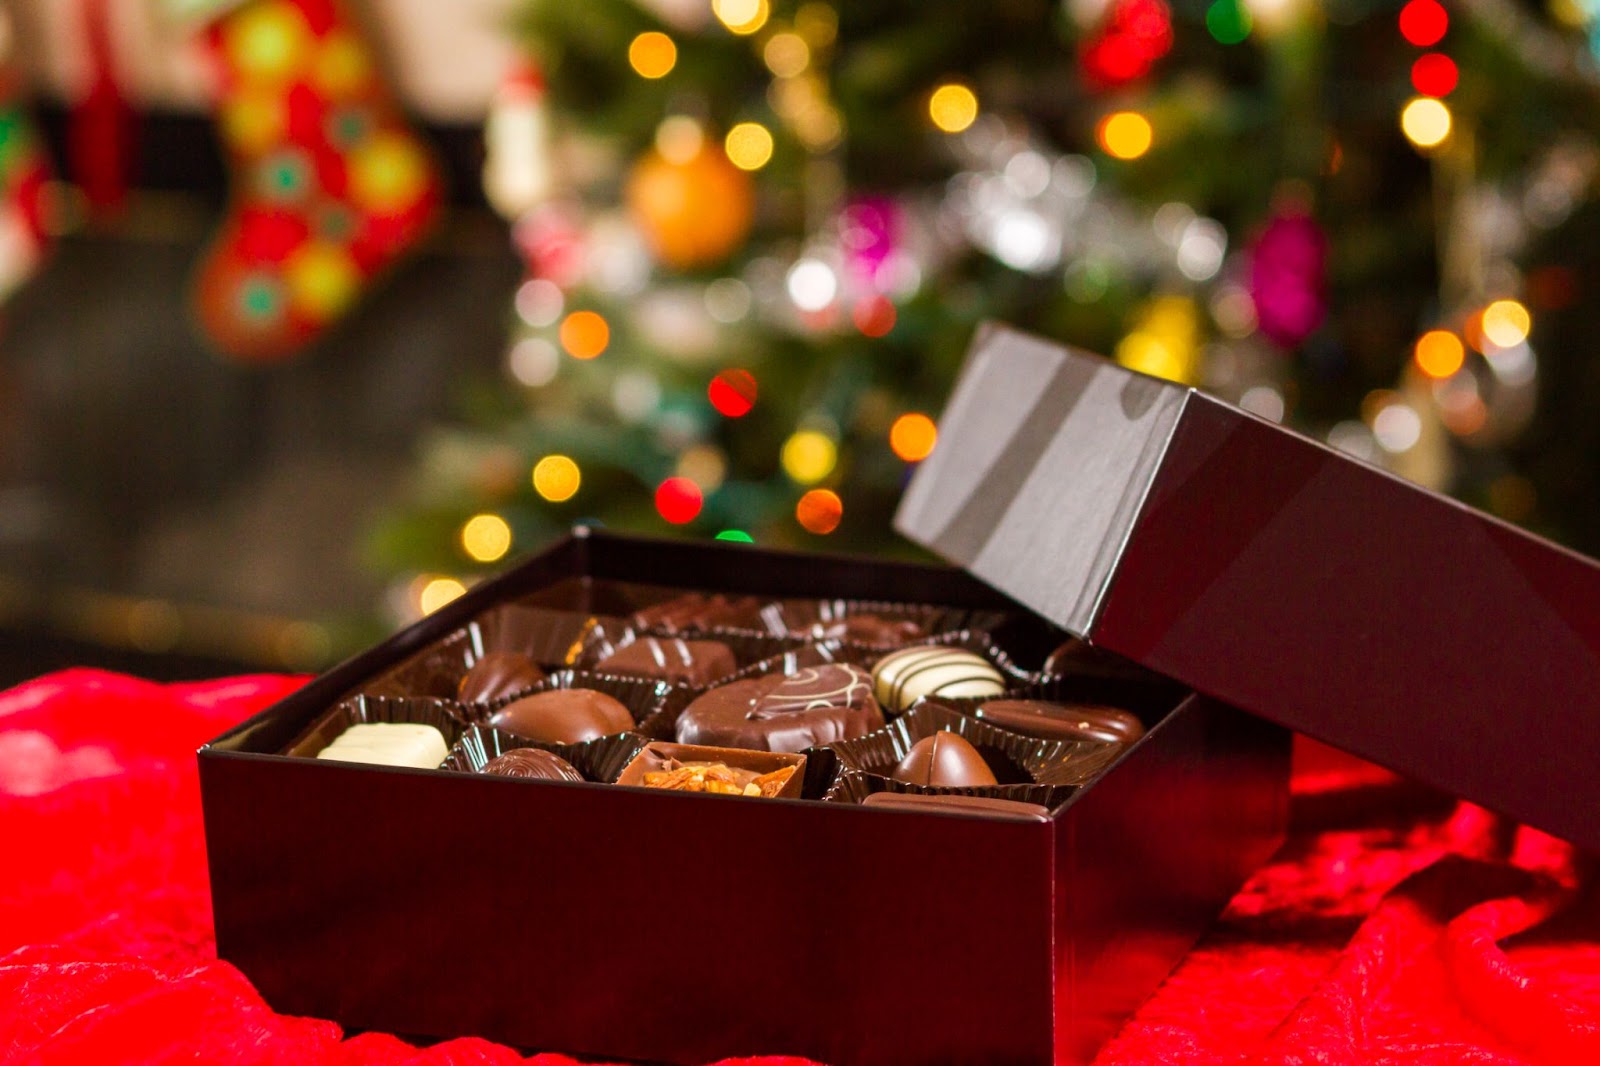 An opened box of chocolates, presented as a Christmas gift, with a softly blurred background of a twinkling Christmas tree and stockings